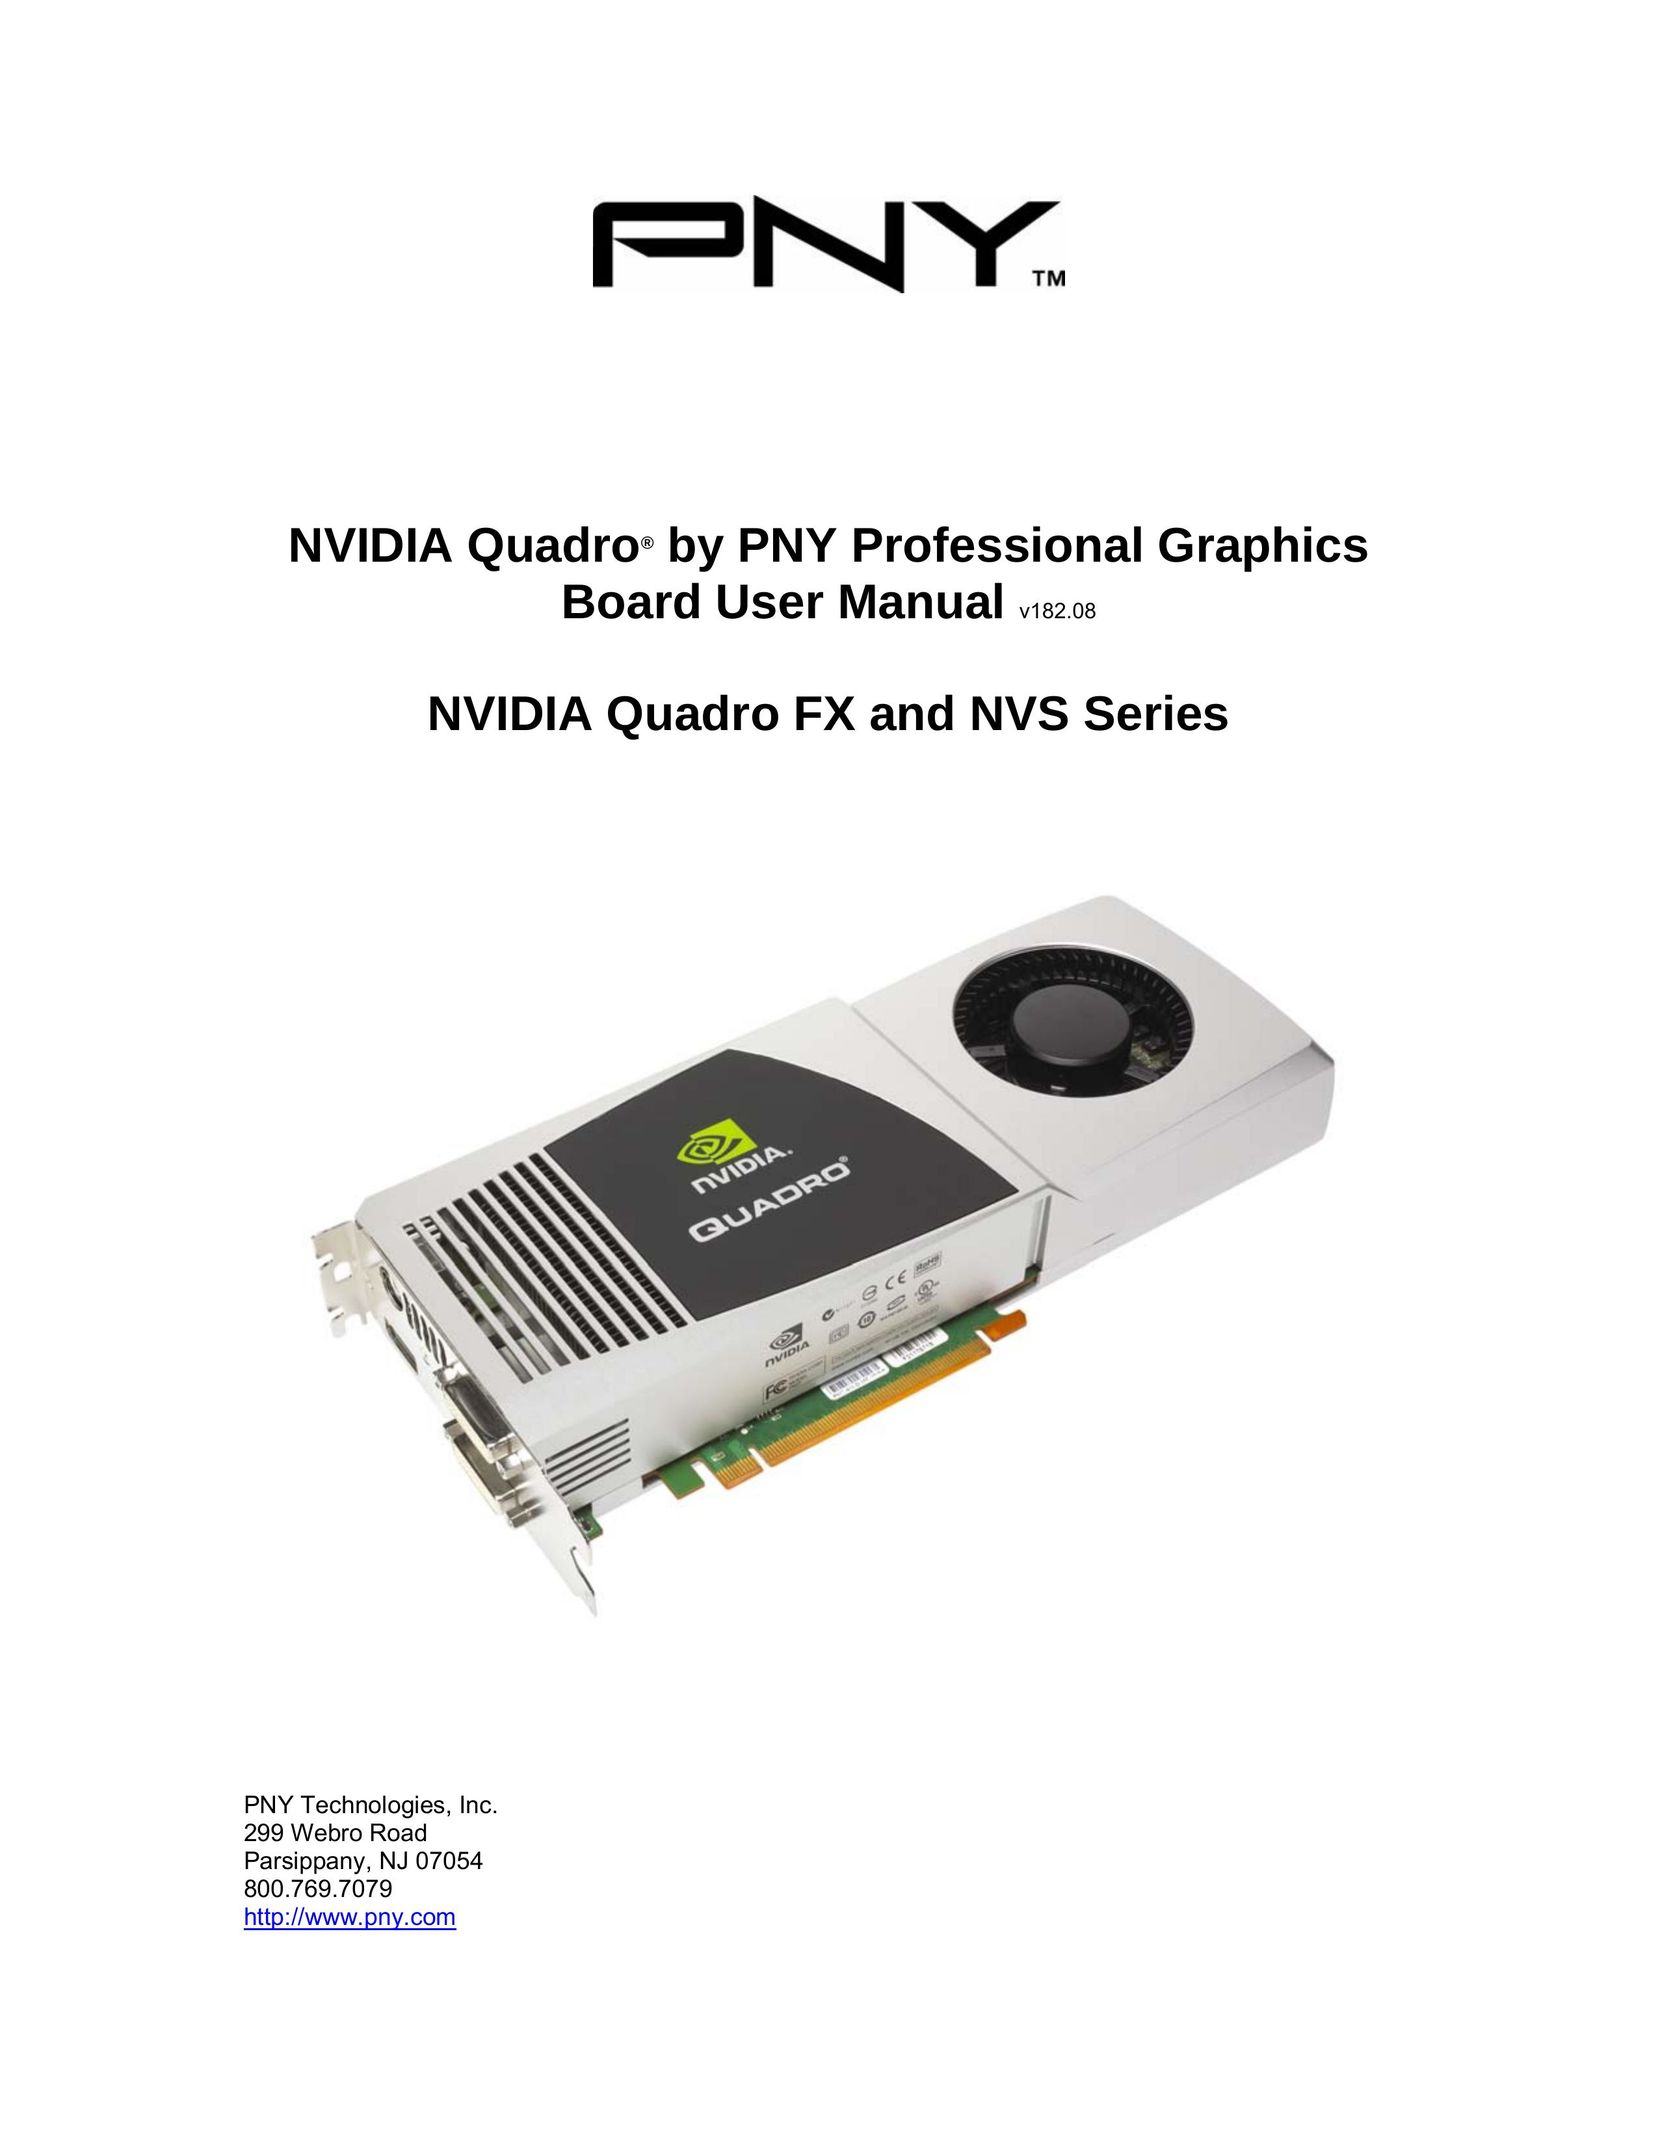 PNY FX 5500 Computer Hardware User Manual